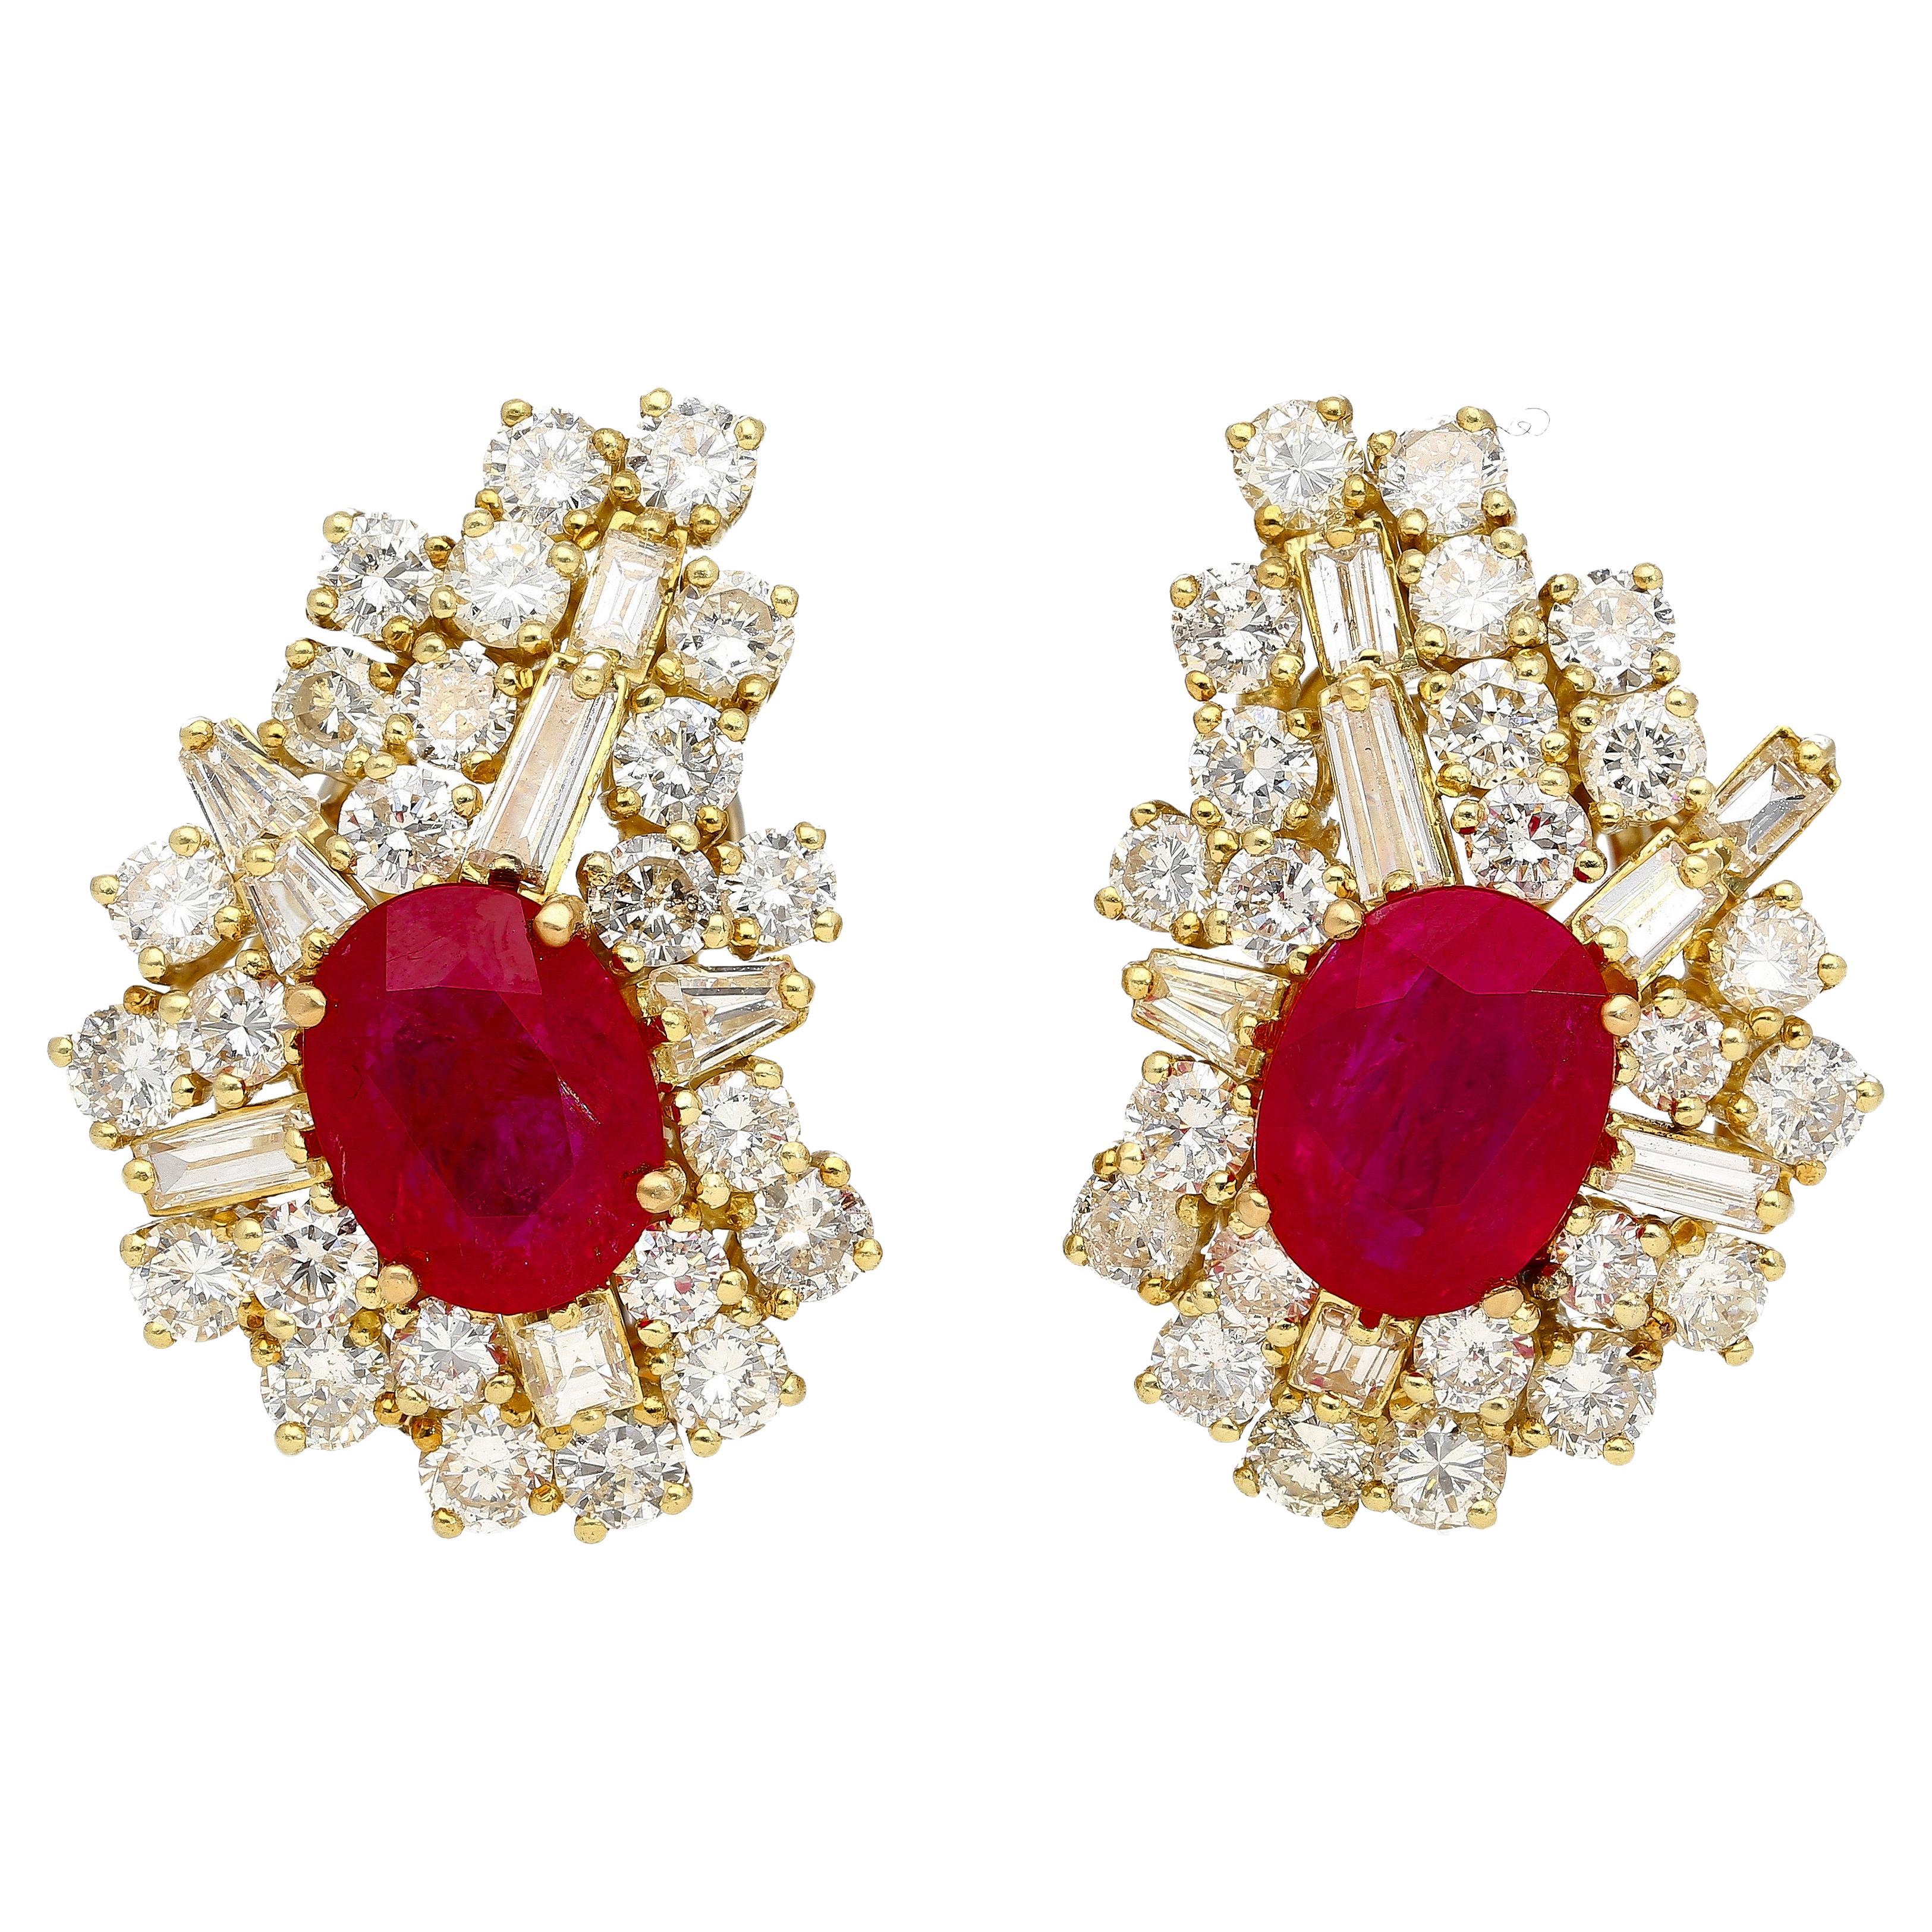 Vintage 4.5 Carat Ruby & Diamond Cluster Clip On Earrings in 18K Yellow Gold